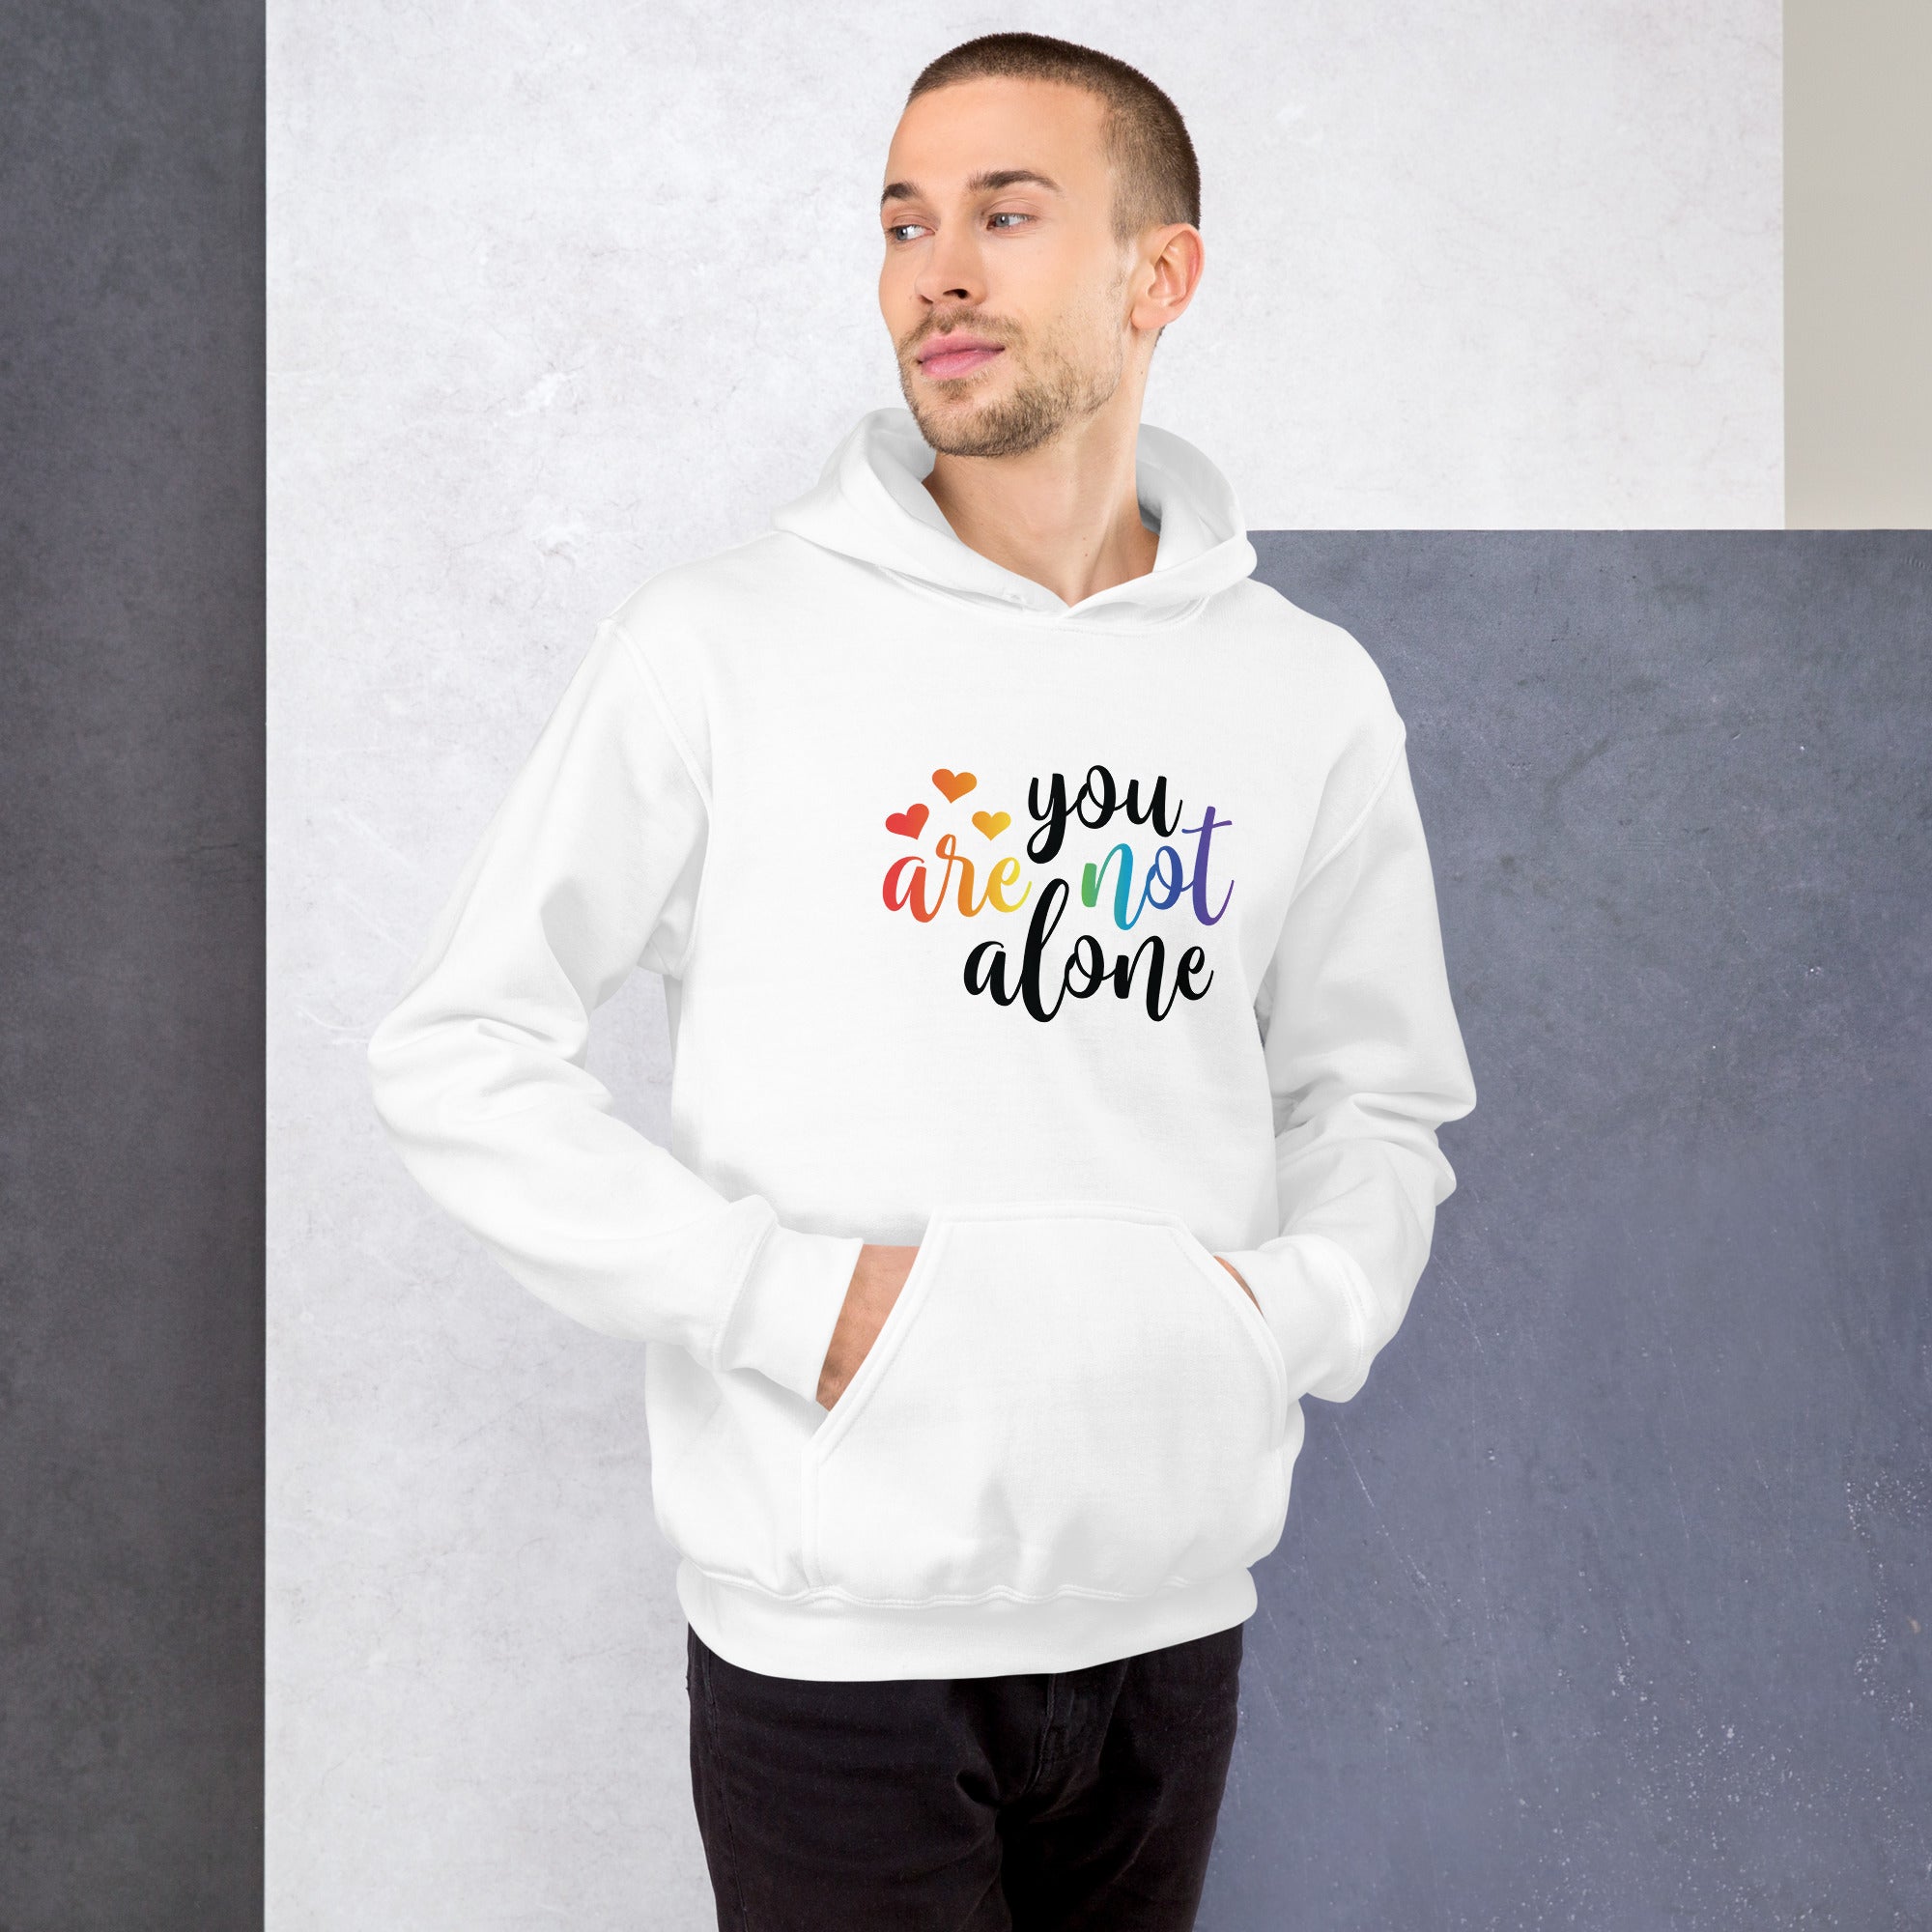 Unisex Hoodie- ADHD- You Are Not Alone